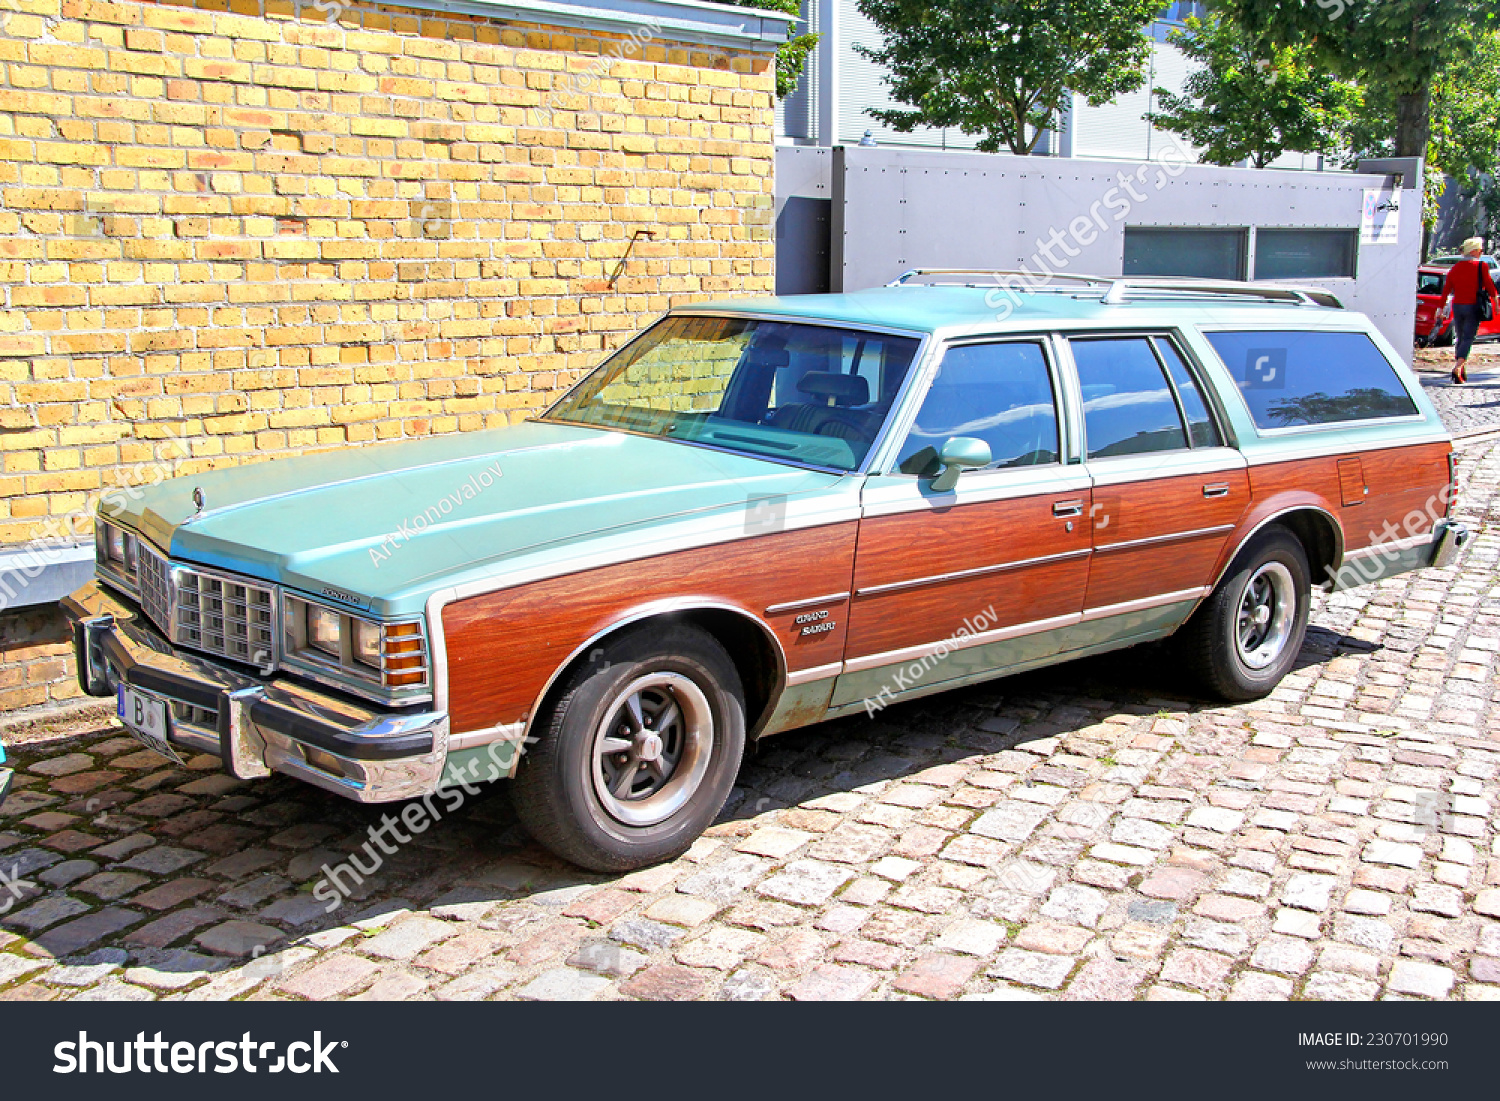 28,586 Station wagon car Stock Photos, Images & Photography Shutterstock